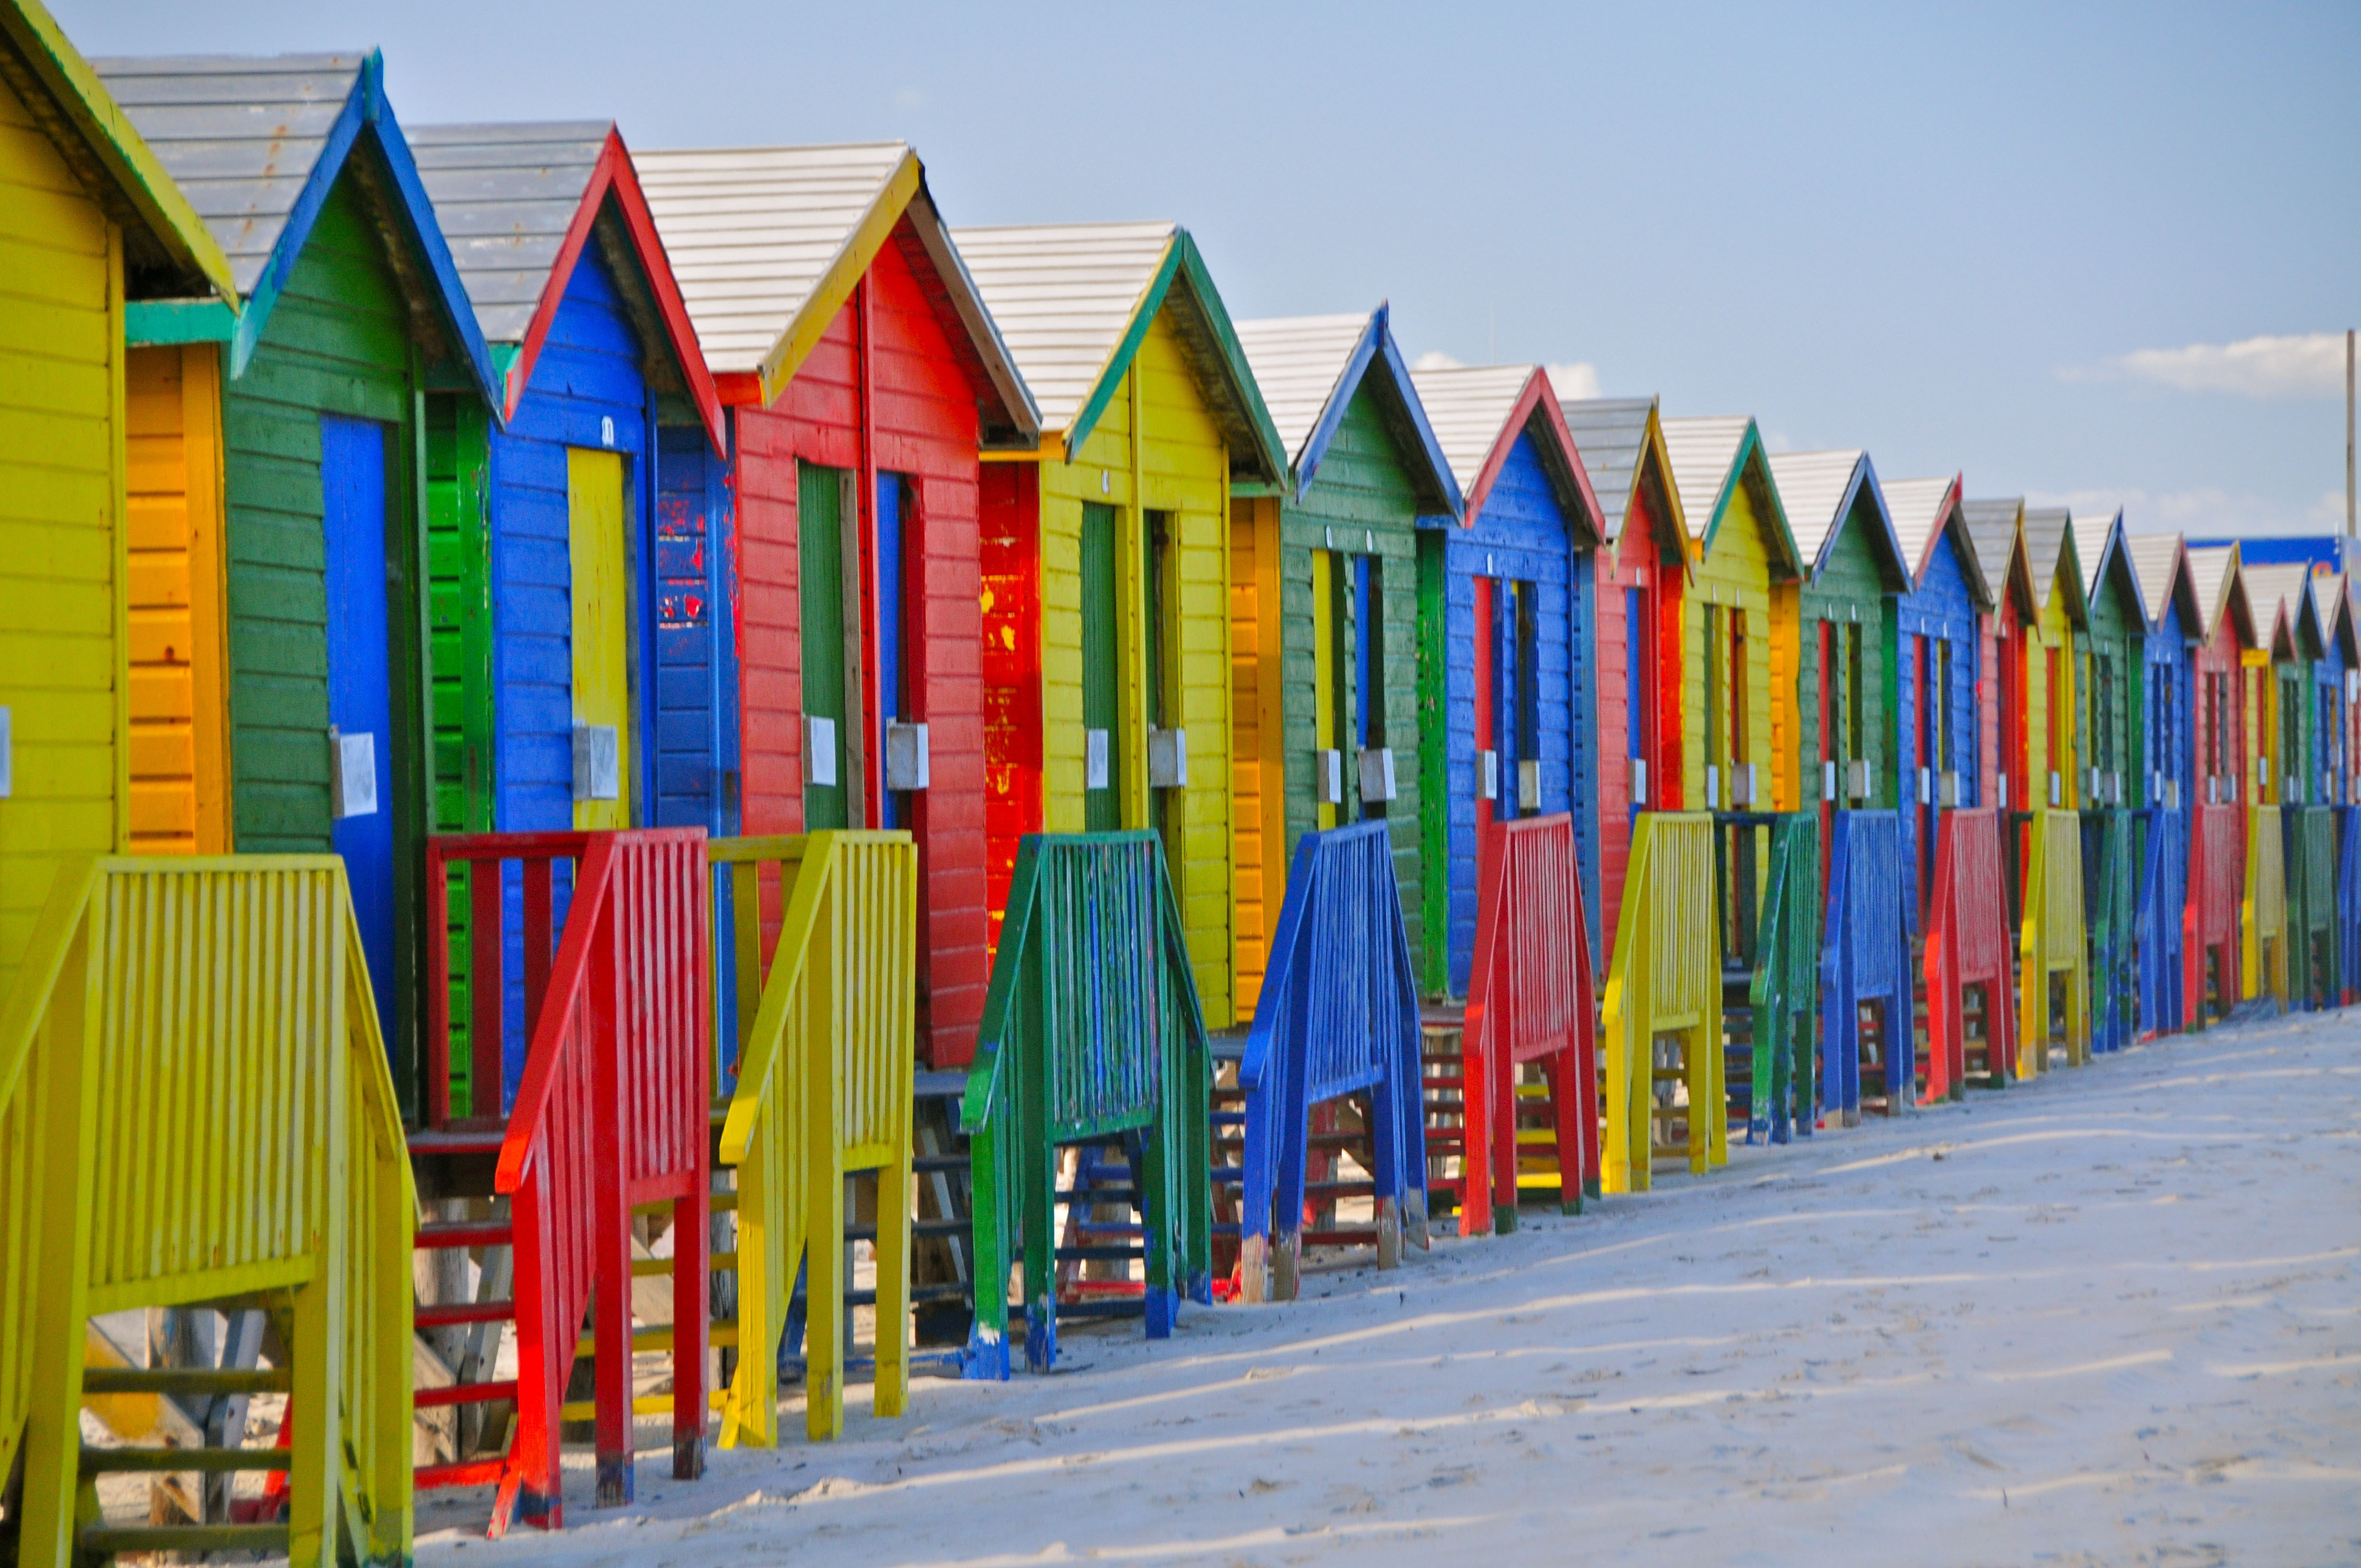 http://obatala.co.uk/wp-content/uploads/2015/11/Beach-Huts-South-Africa.jpg